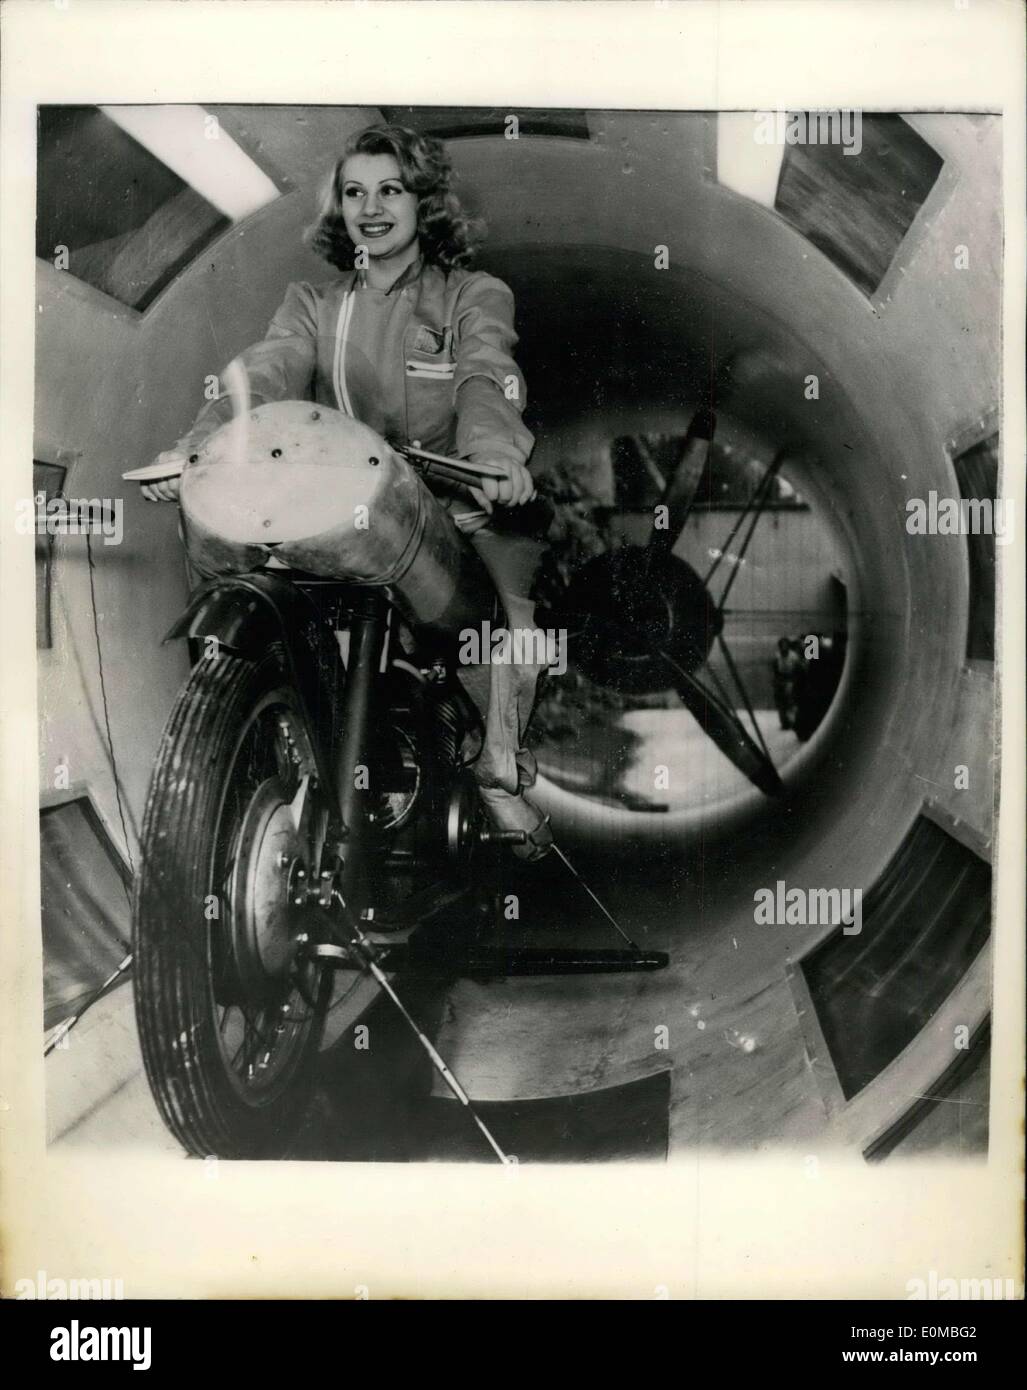 Jul. 19, 1954 - Italy's Moto Gizzi Cycle Company Completes Its Own Wind Tunnel: The Famous Italian Motor Cycle Company Moto Guzzi has just introduced the world's first wind tunnel - specially constructed solely for the testing of new motor cycle designs.. The company has pent millions of Lira in research in motorcycle cycle design. which they see will yield big dividends in the forthcoming world International Races Stock Photo